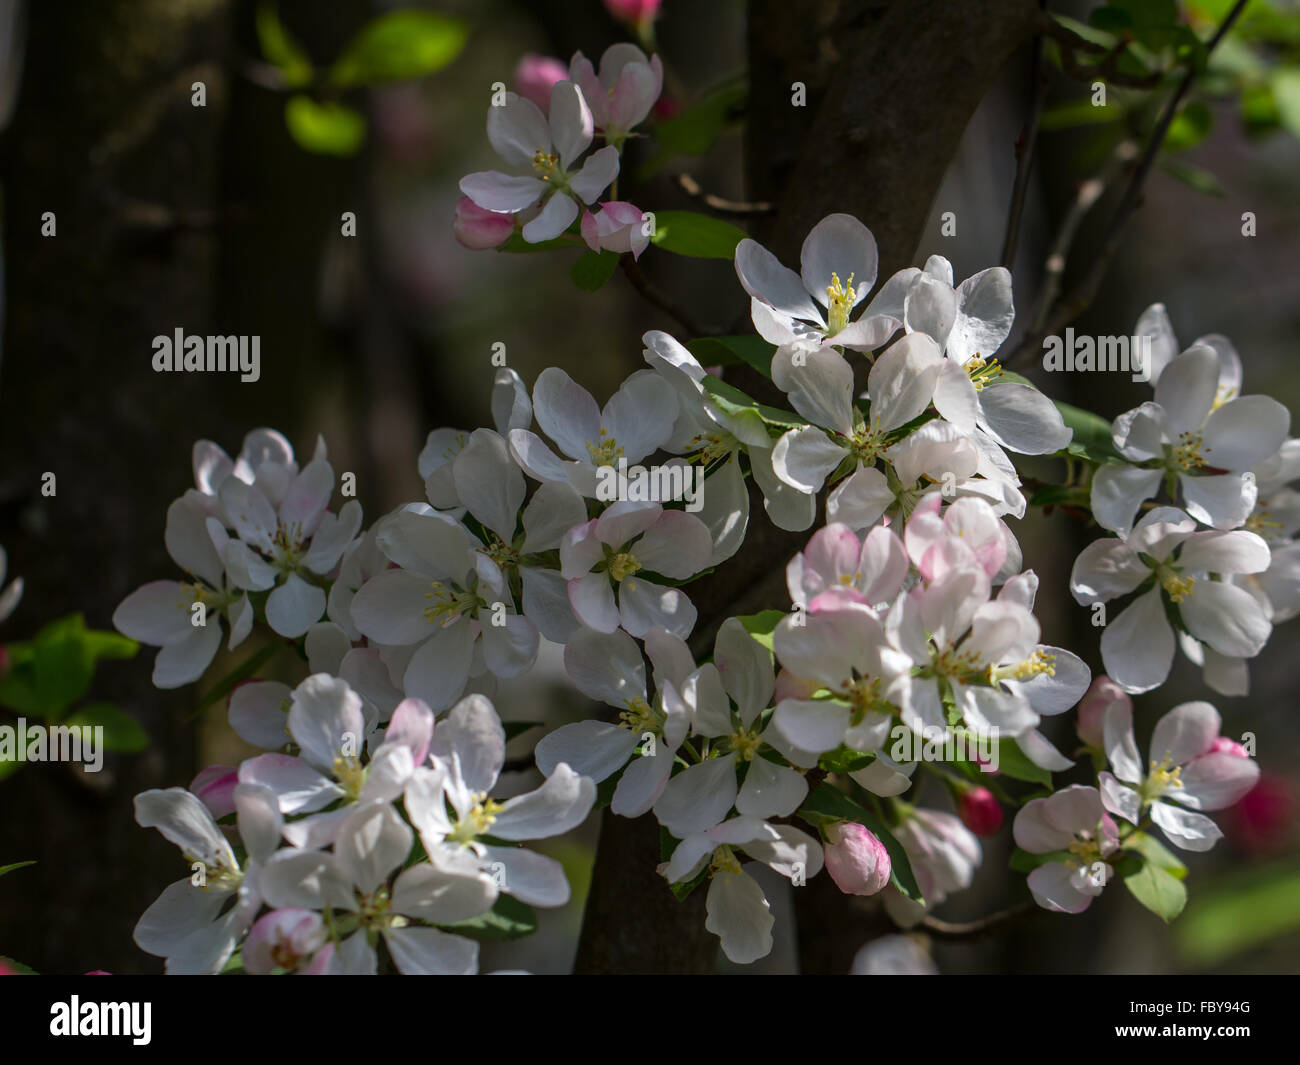 Cherry blossoms against a dark background Stock Photo